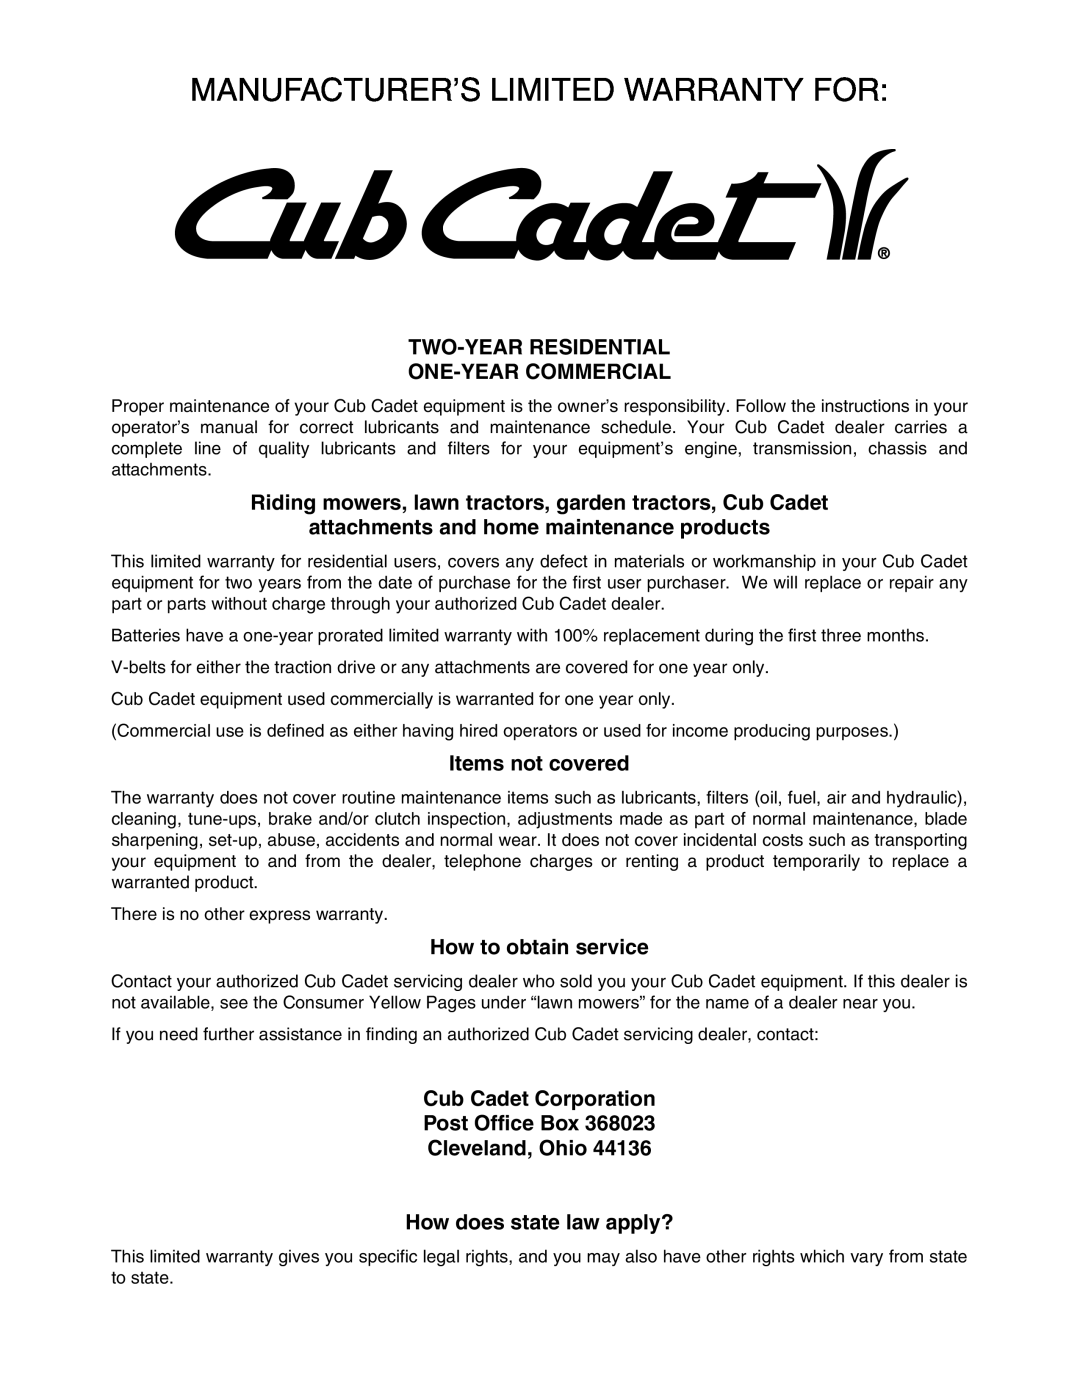 Cub Cadet 1345 SWE manual Manufacturer’S Limited Warranty For, Two-Year Residential One-Year Commercial, Items not covered 